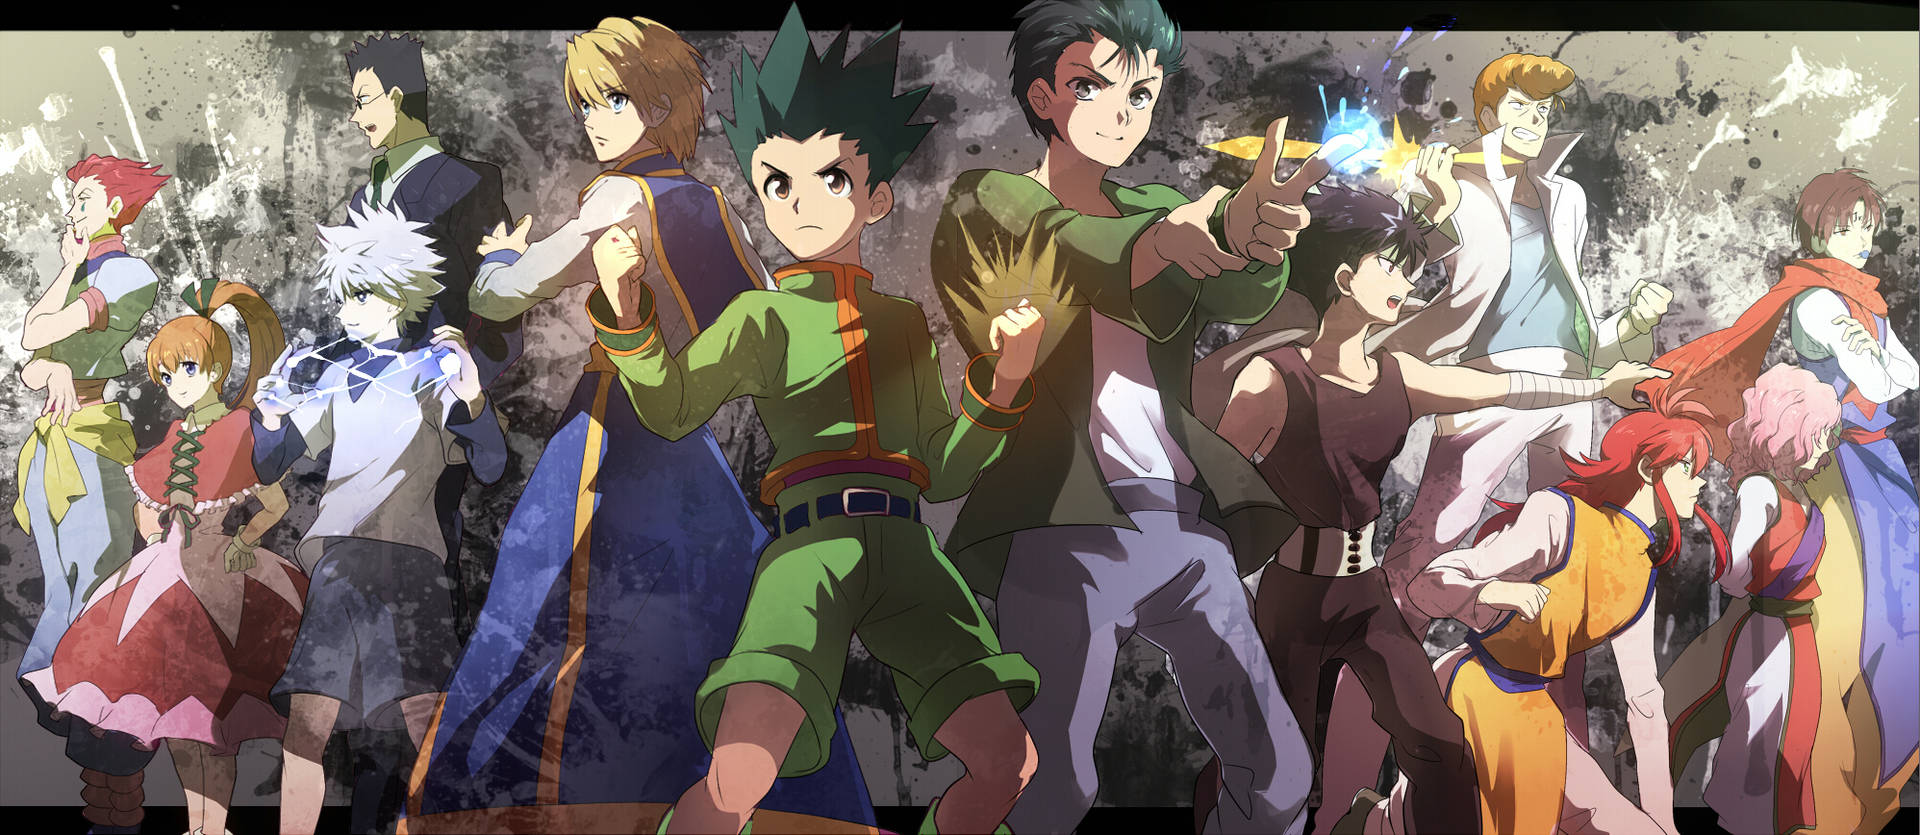 Multiverse Hunter X Hunter And Ghost Fighter. Wallpaper